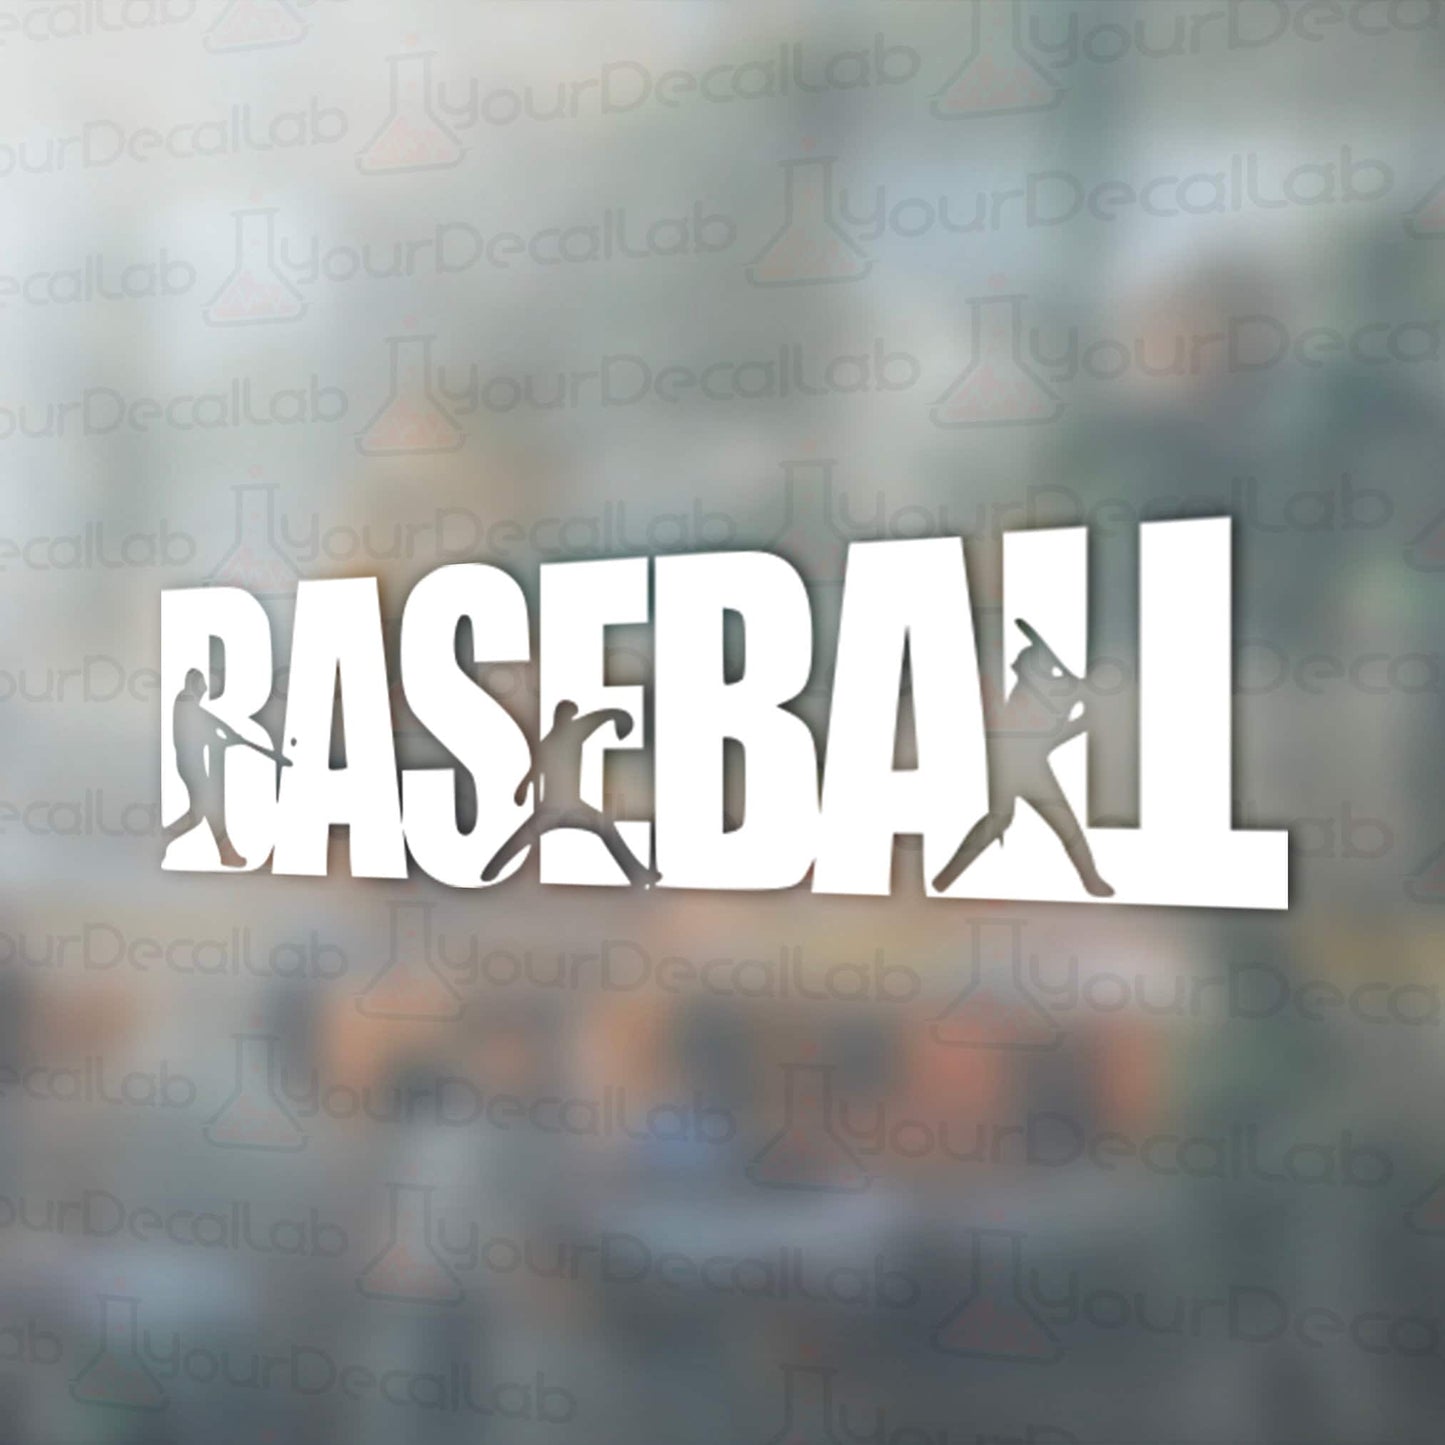 a glass window with the word baseball on it